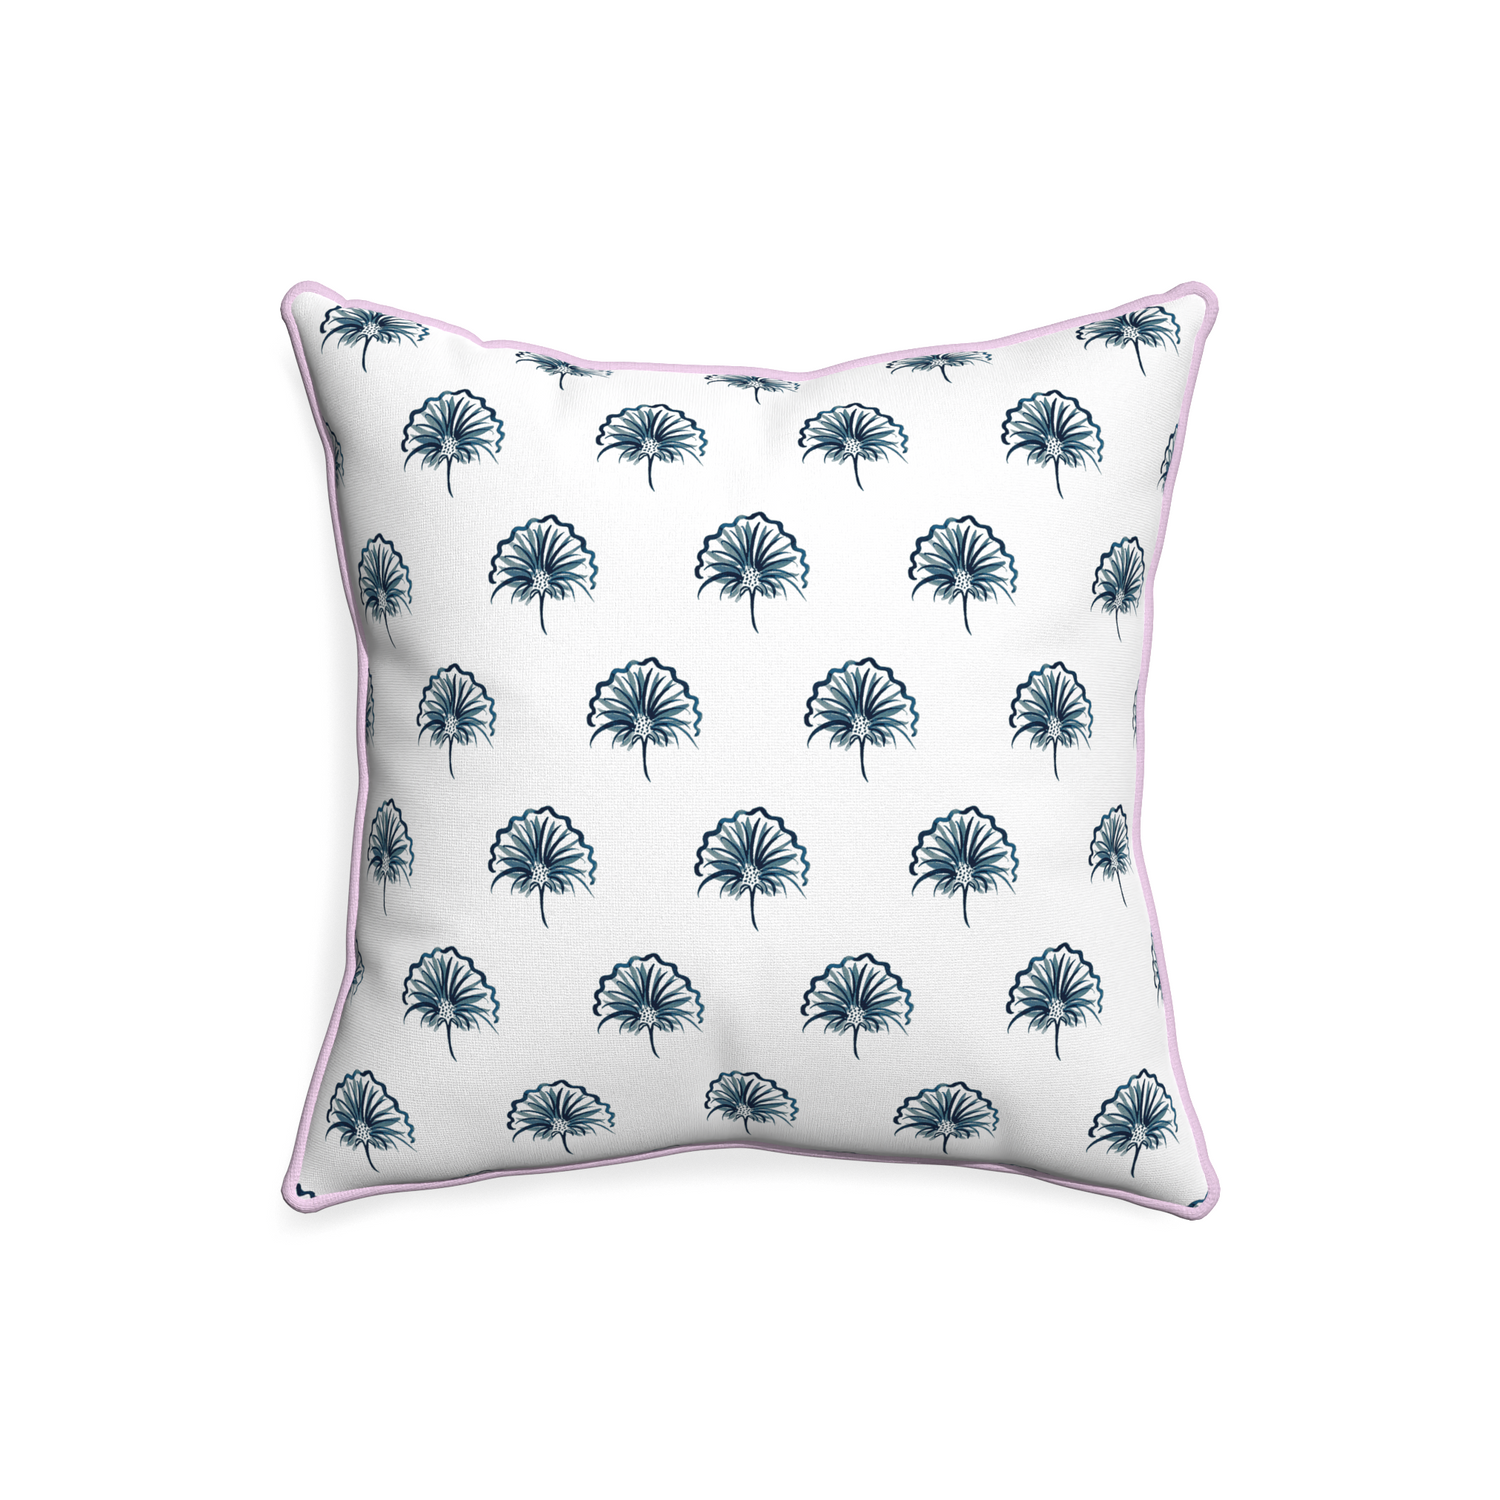 20-square penelope midnight custom floral navypillow with l piping on white background